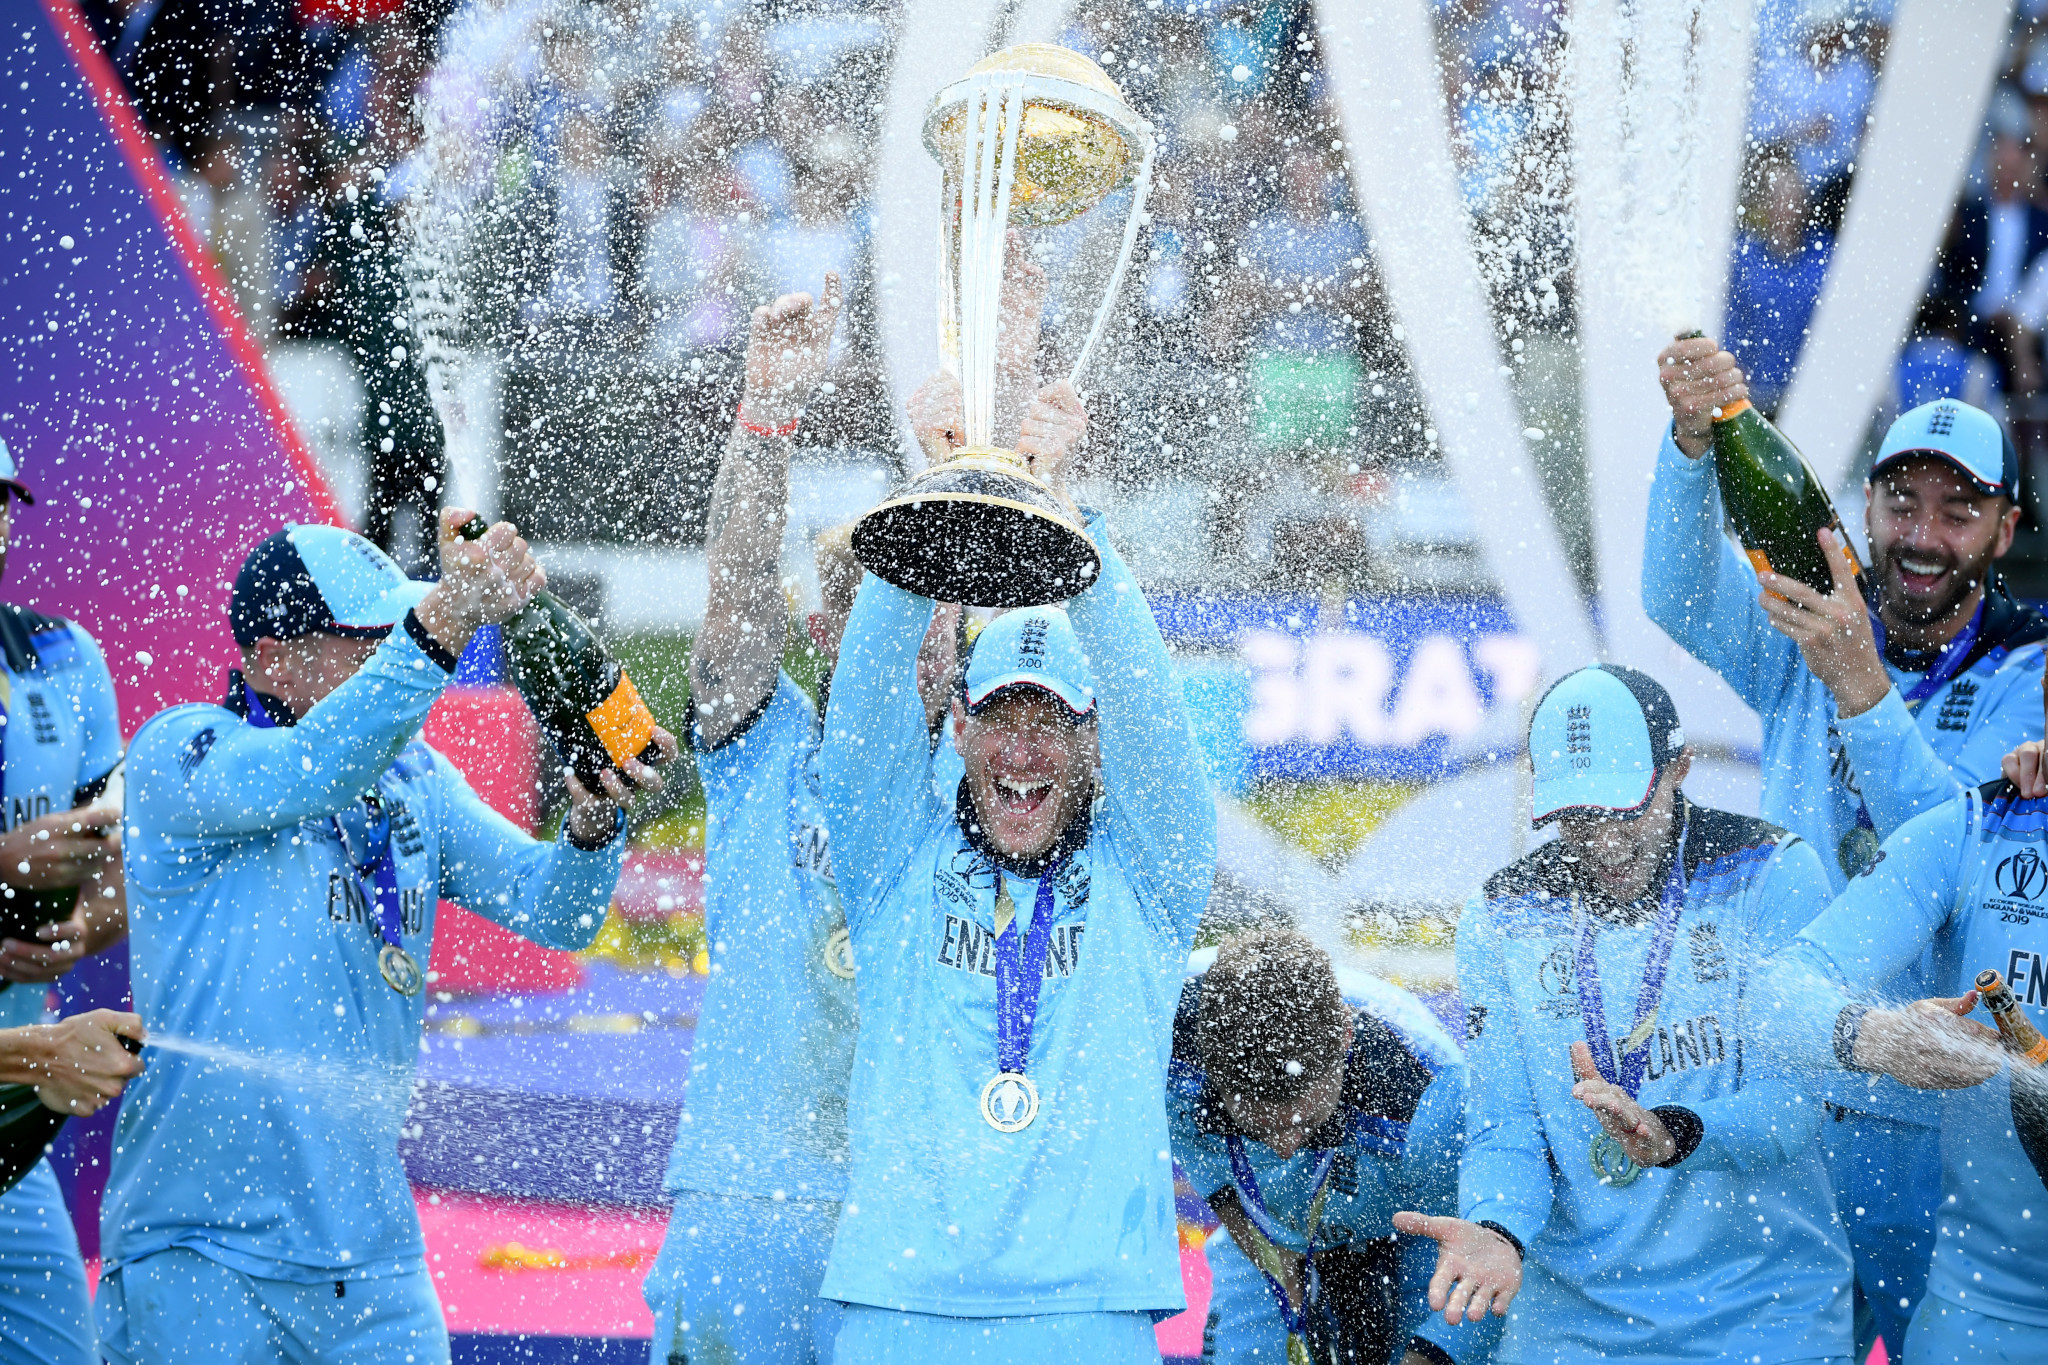 England crowned cricket World Cup champions after amazing victory over New Zealand